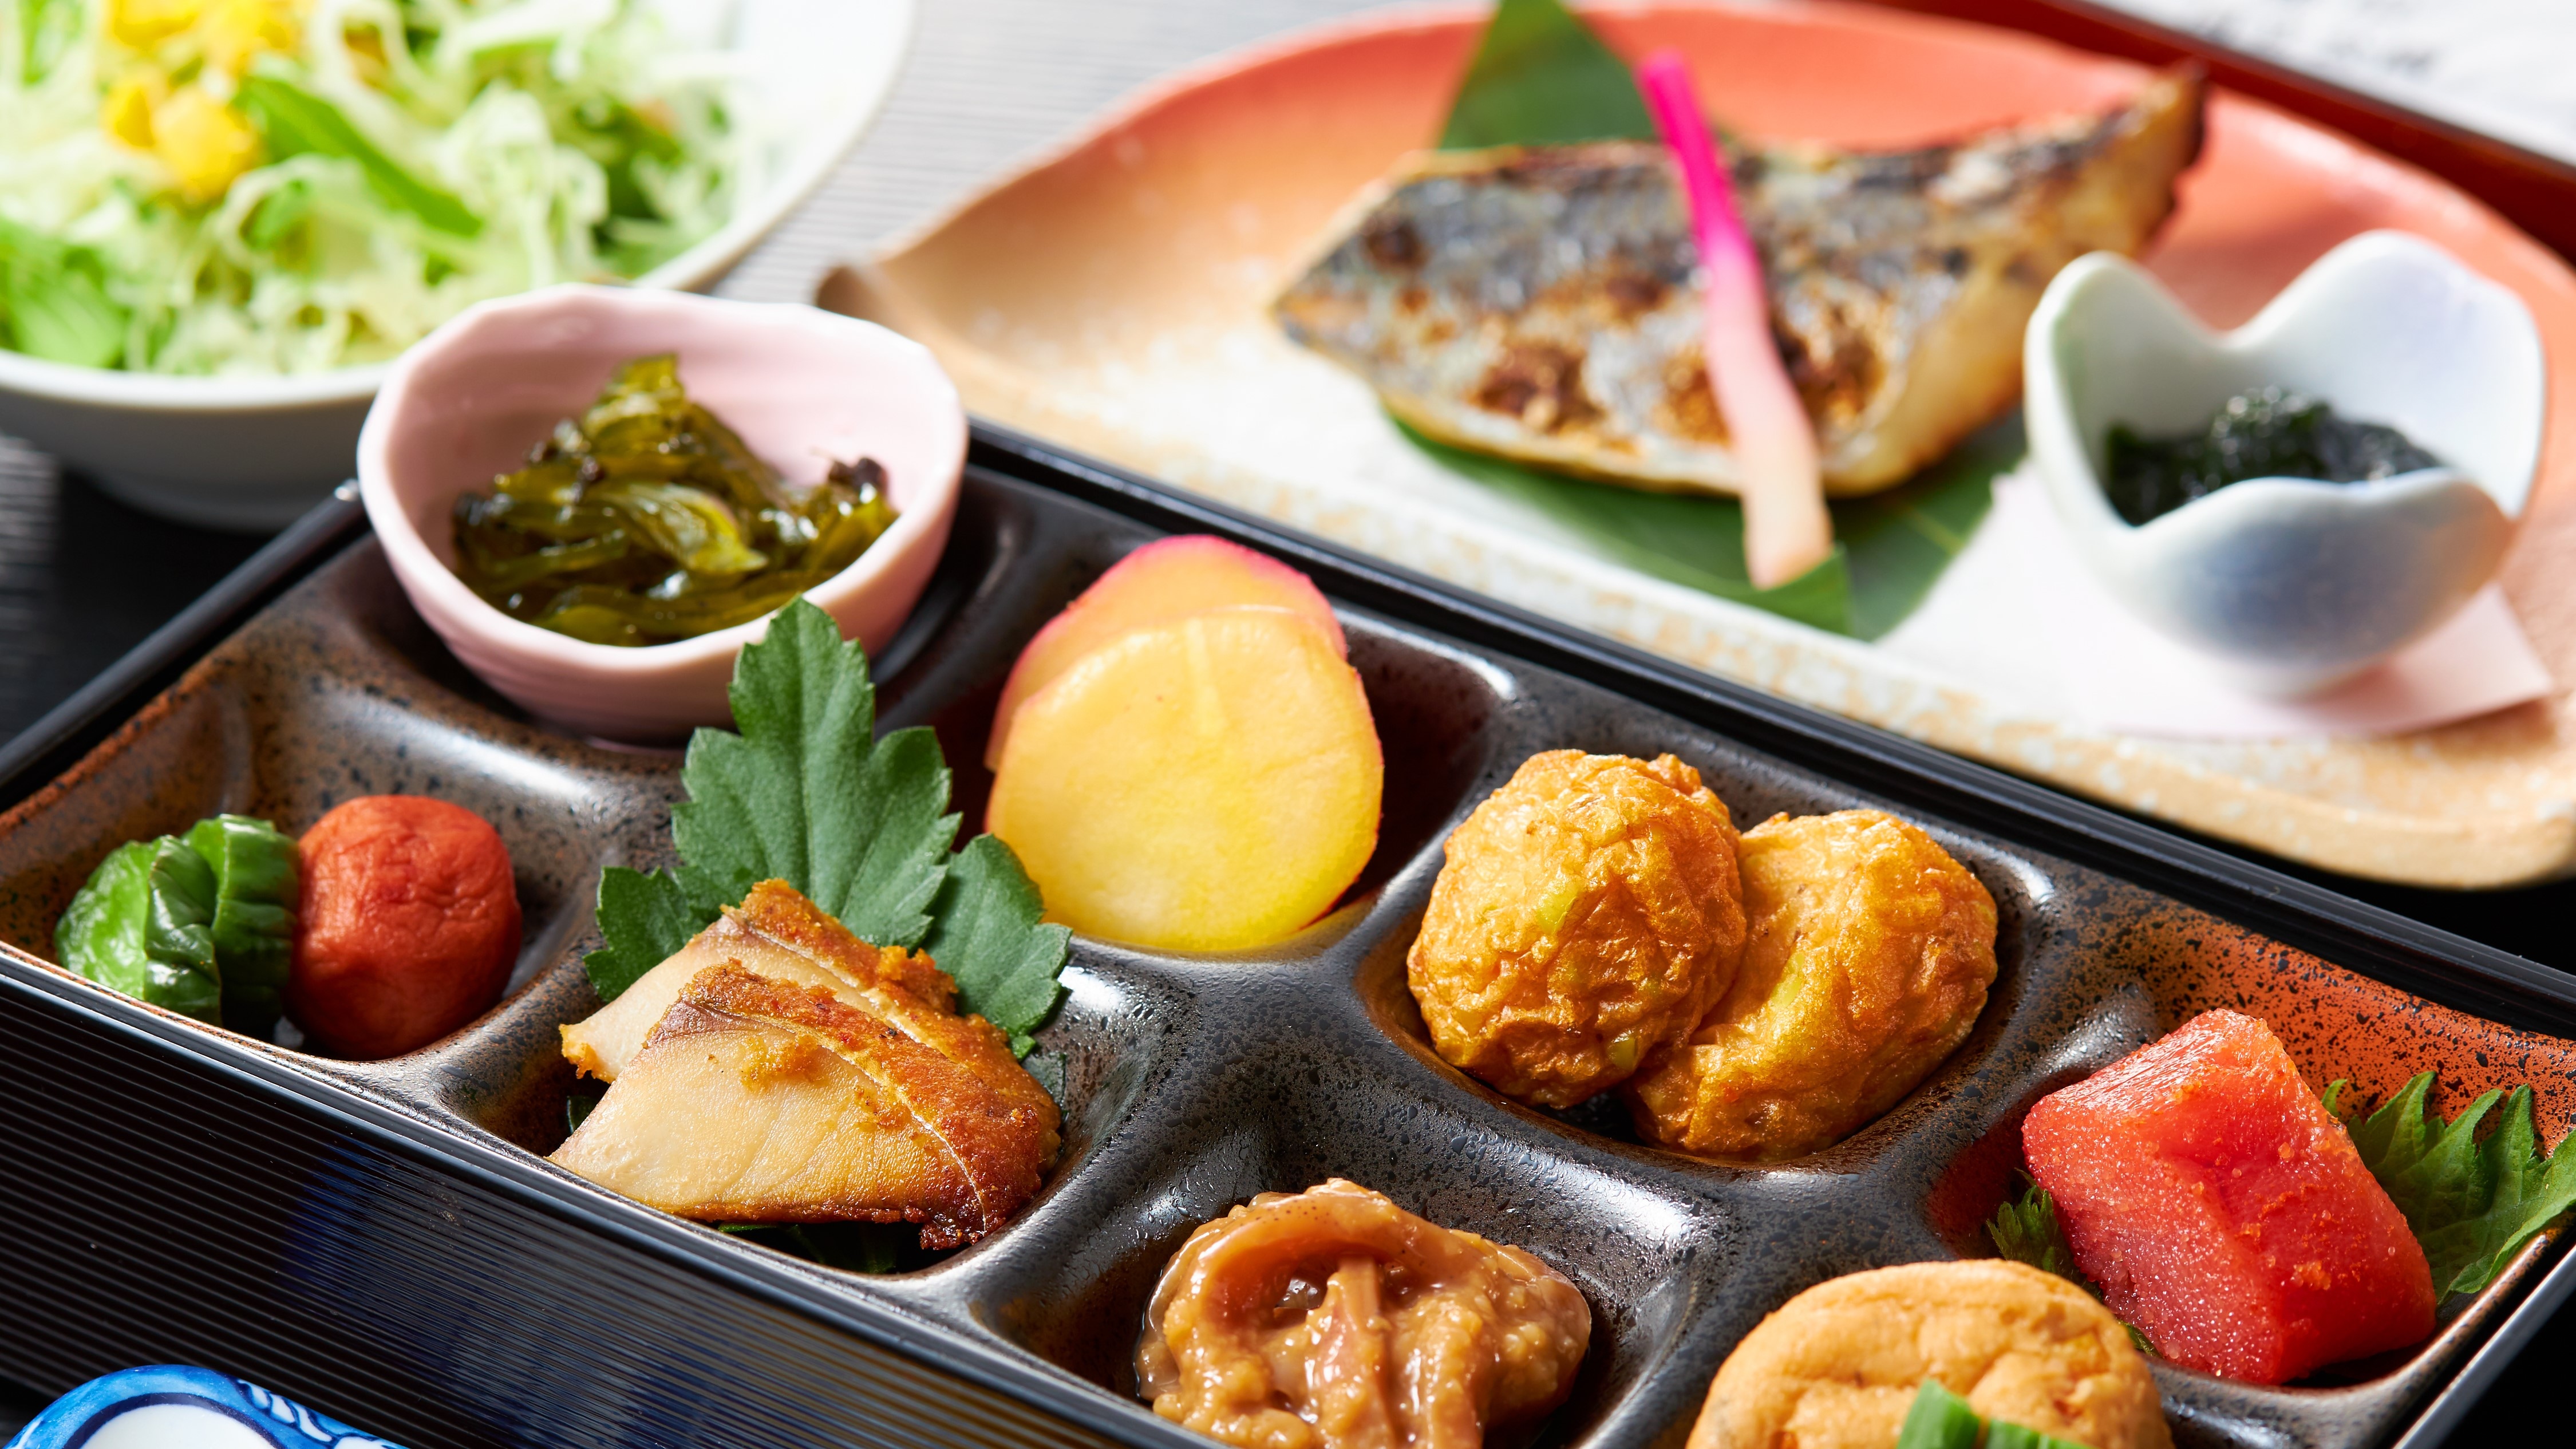 Please enjoy the local things that you can enjoy in Kinosaki for breakfast.